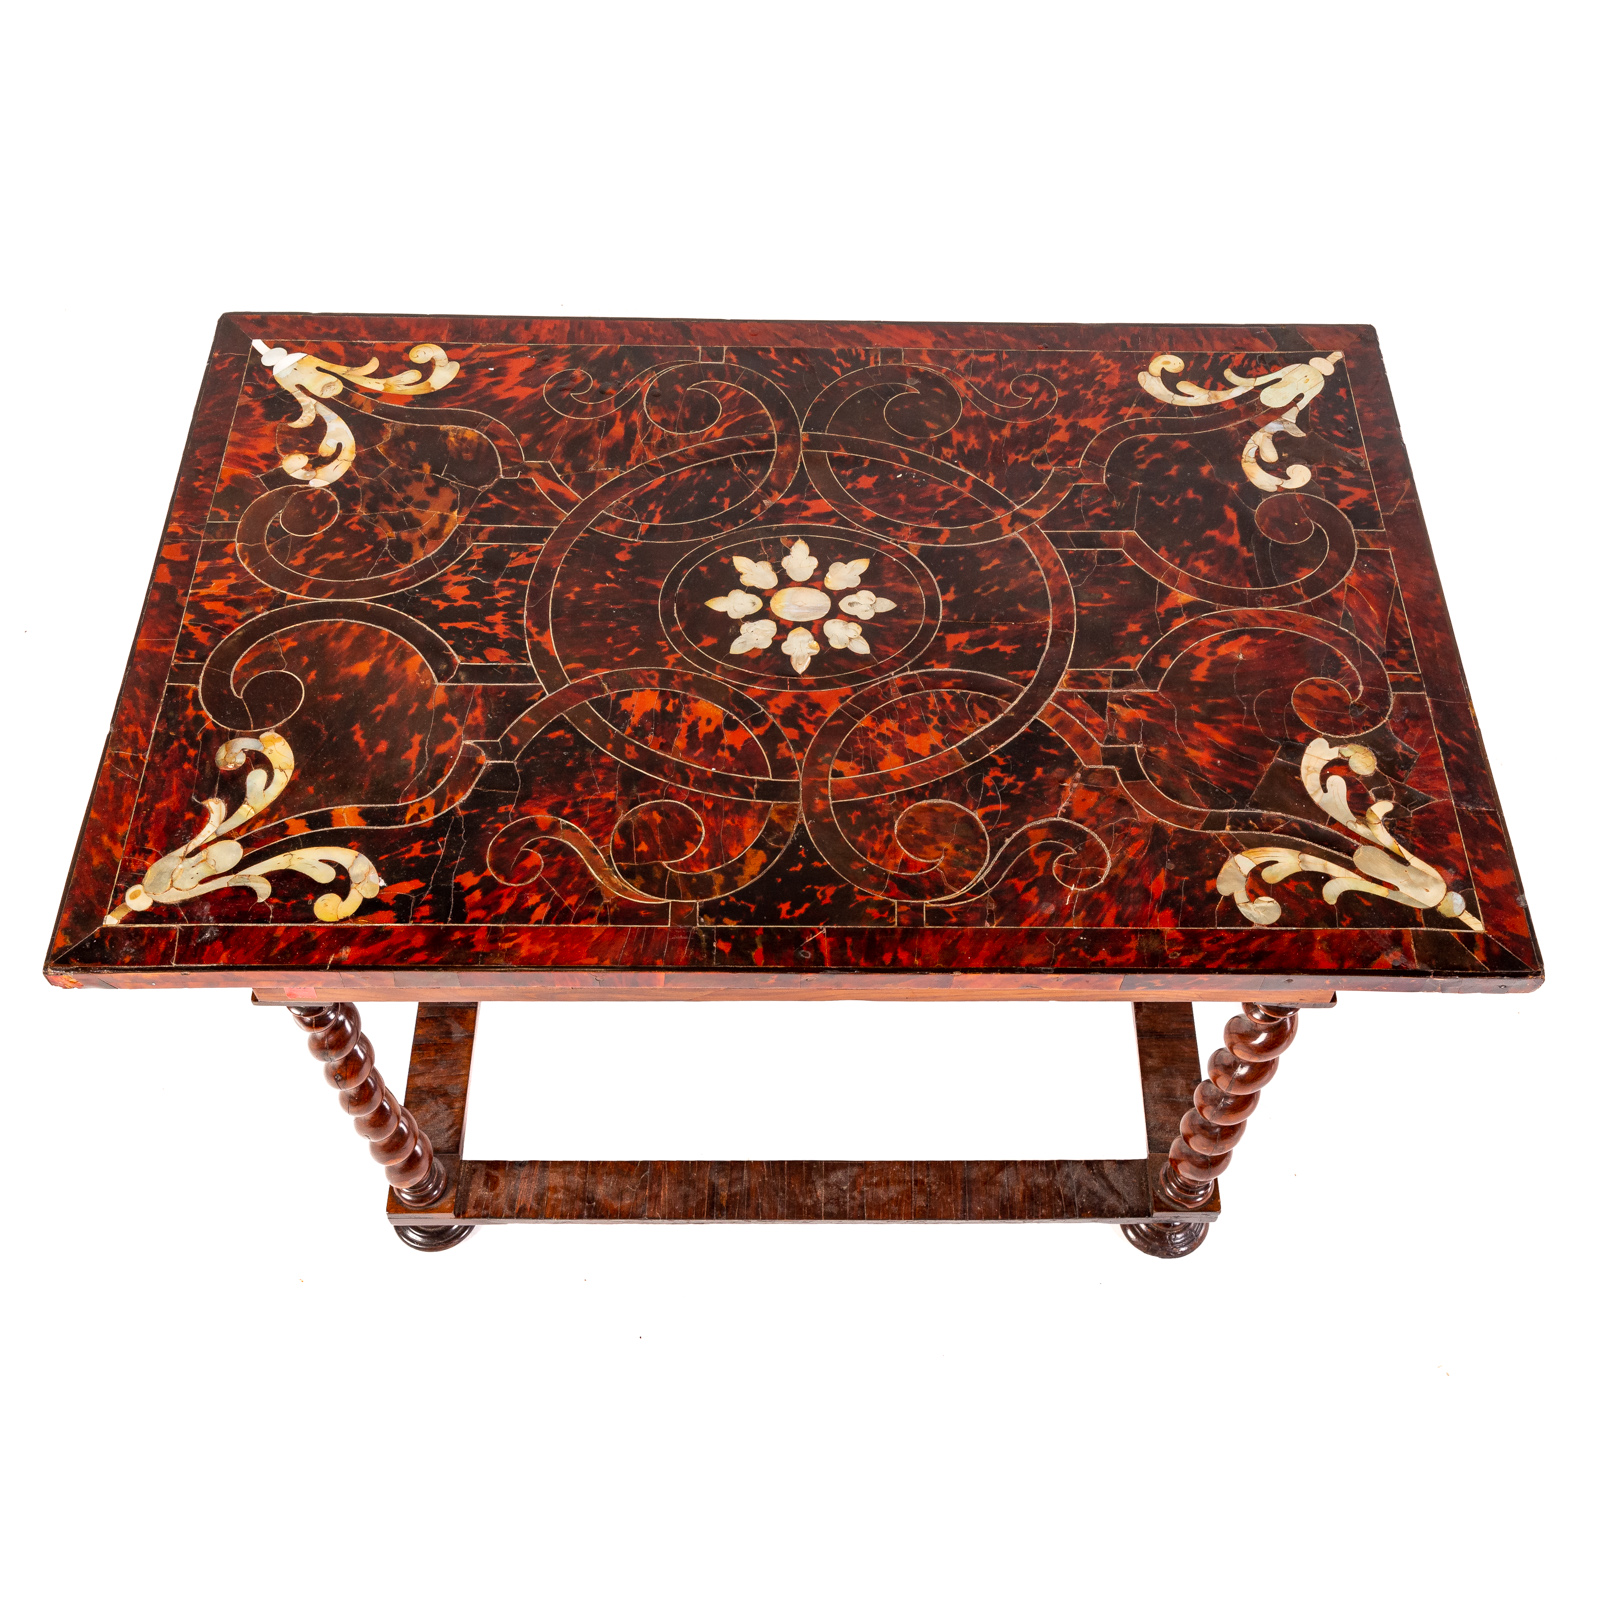 JACOBEAN STYLE SIDE TABLE WITH